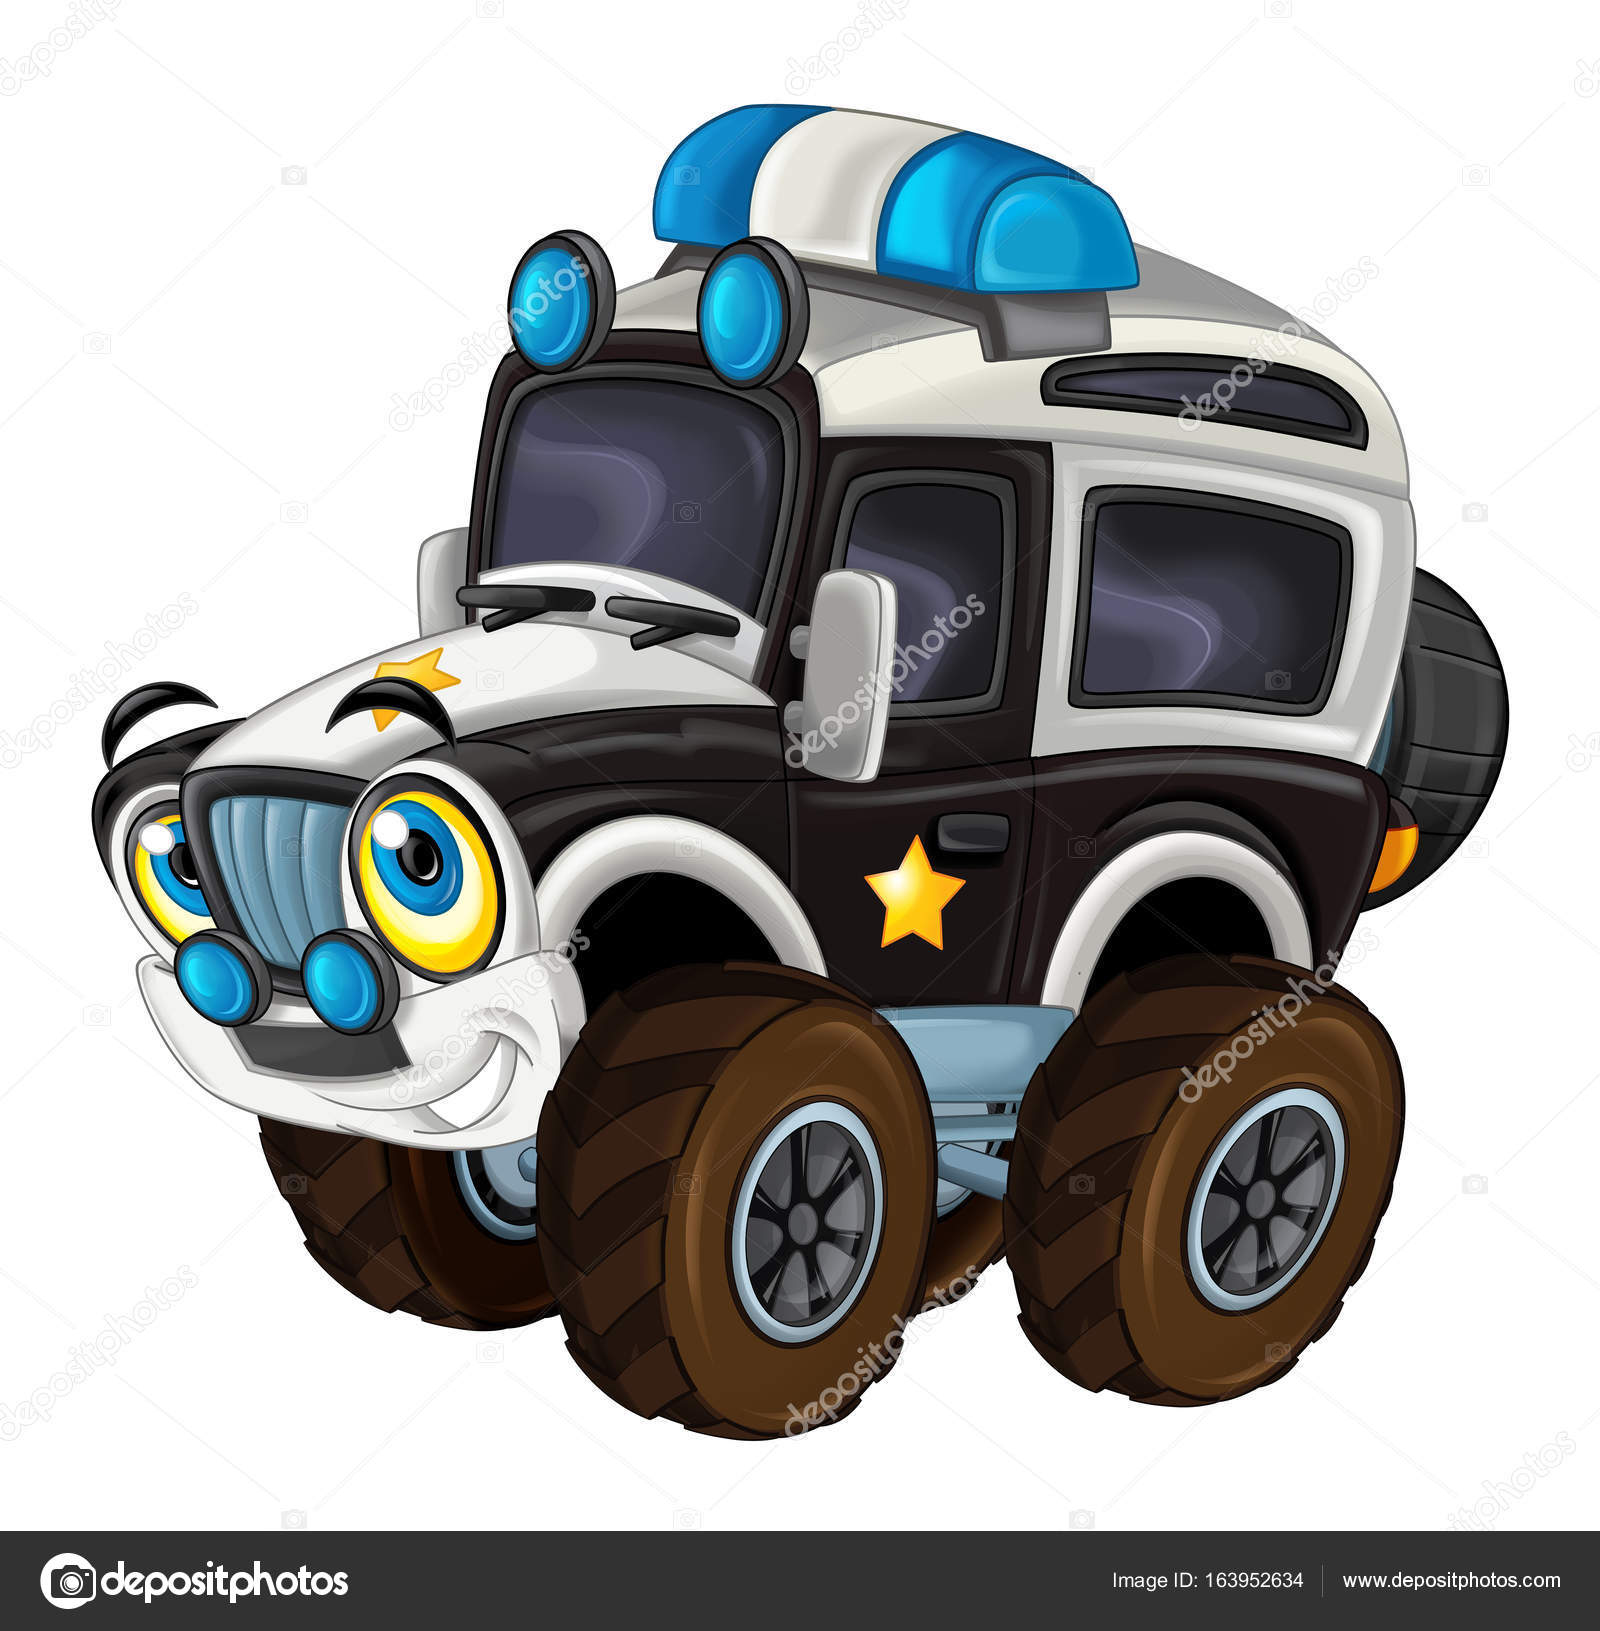 Off road police car Stock Photo by ©illustrator_hft 163952634